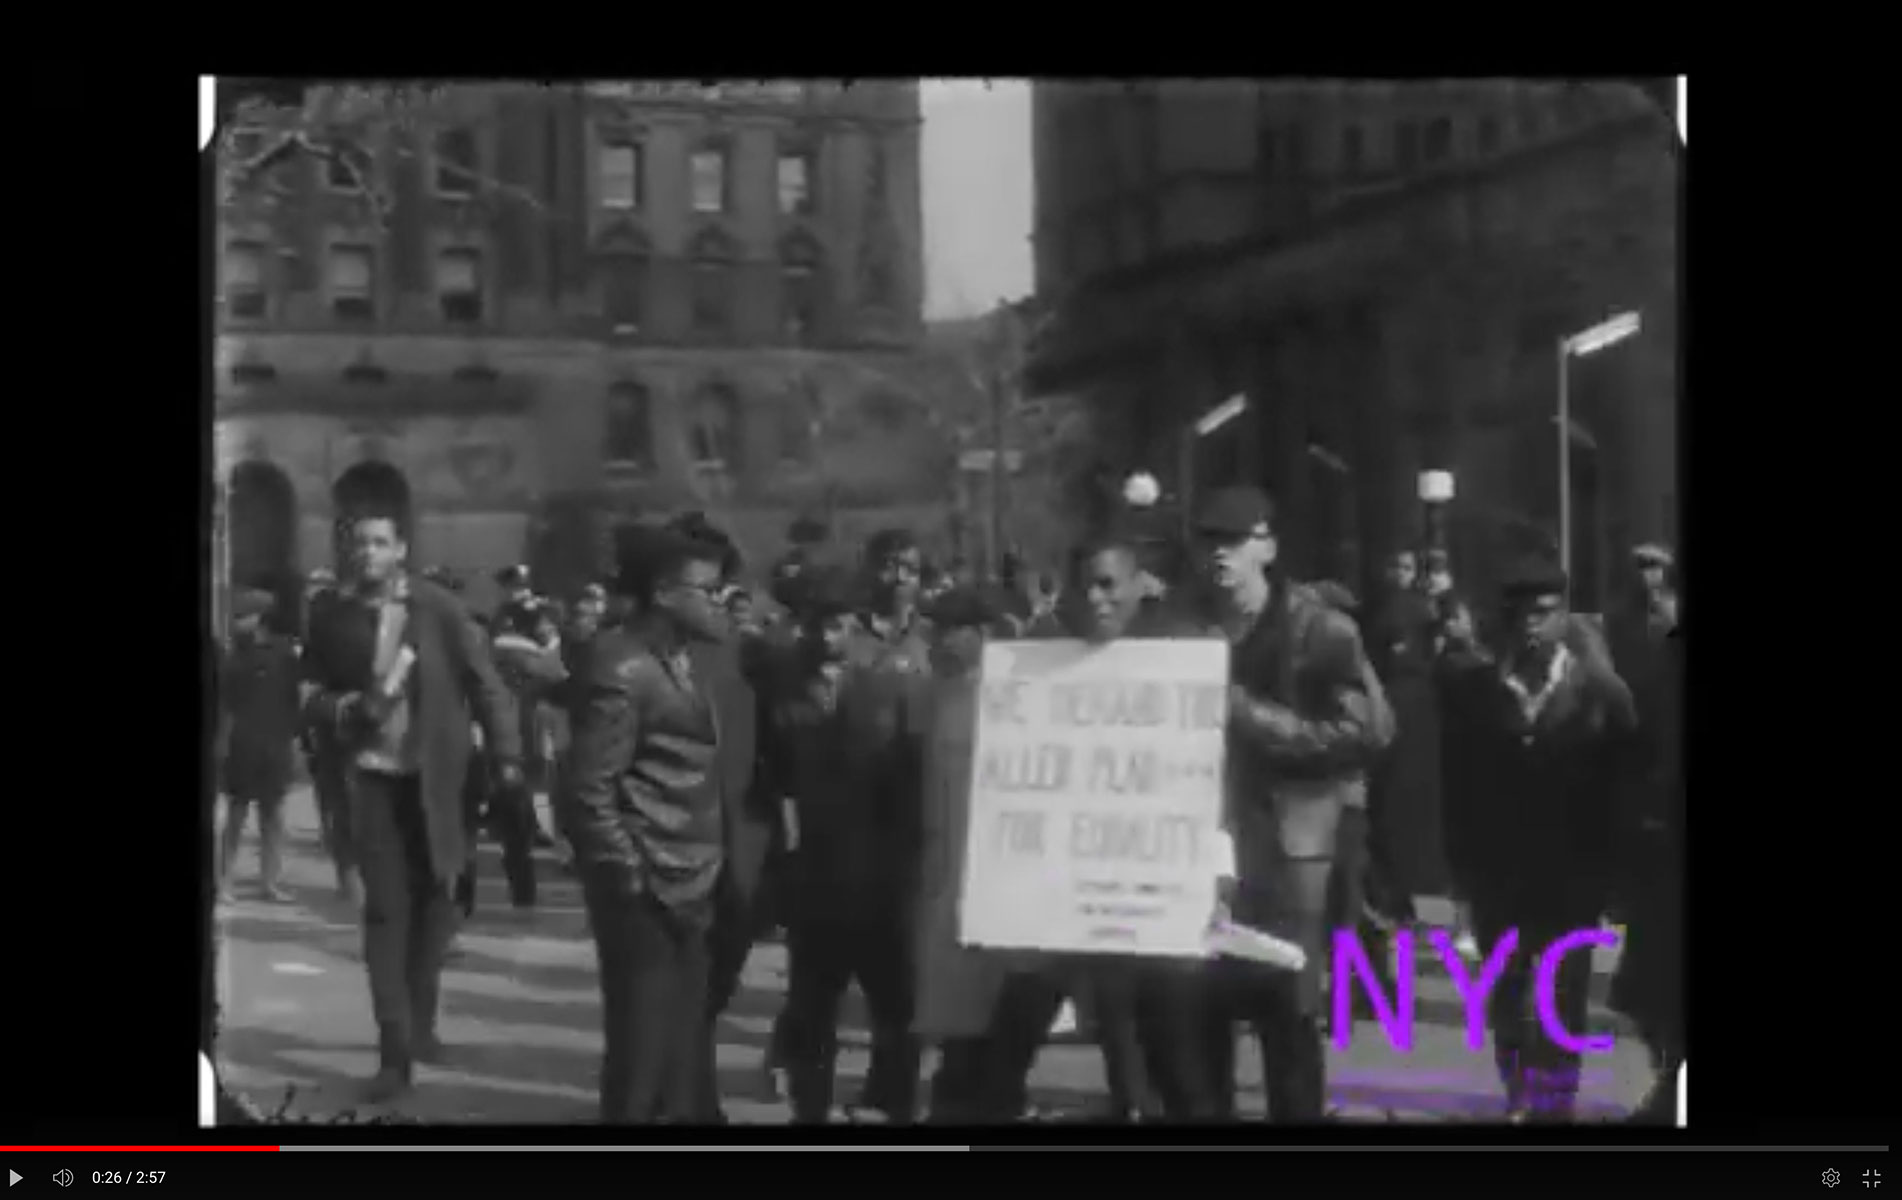 Protestors march, carrying signs